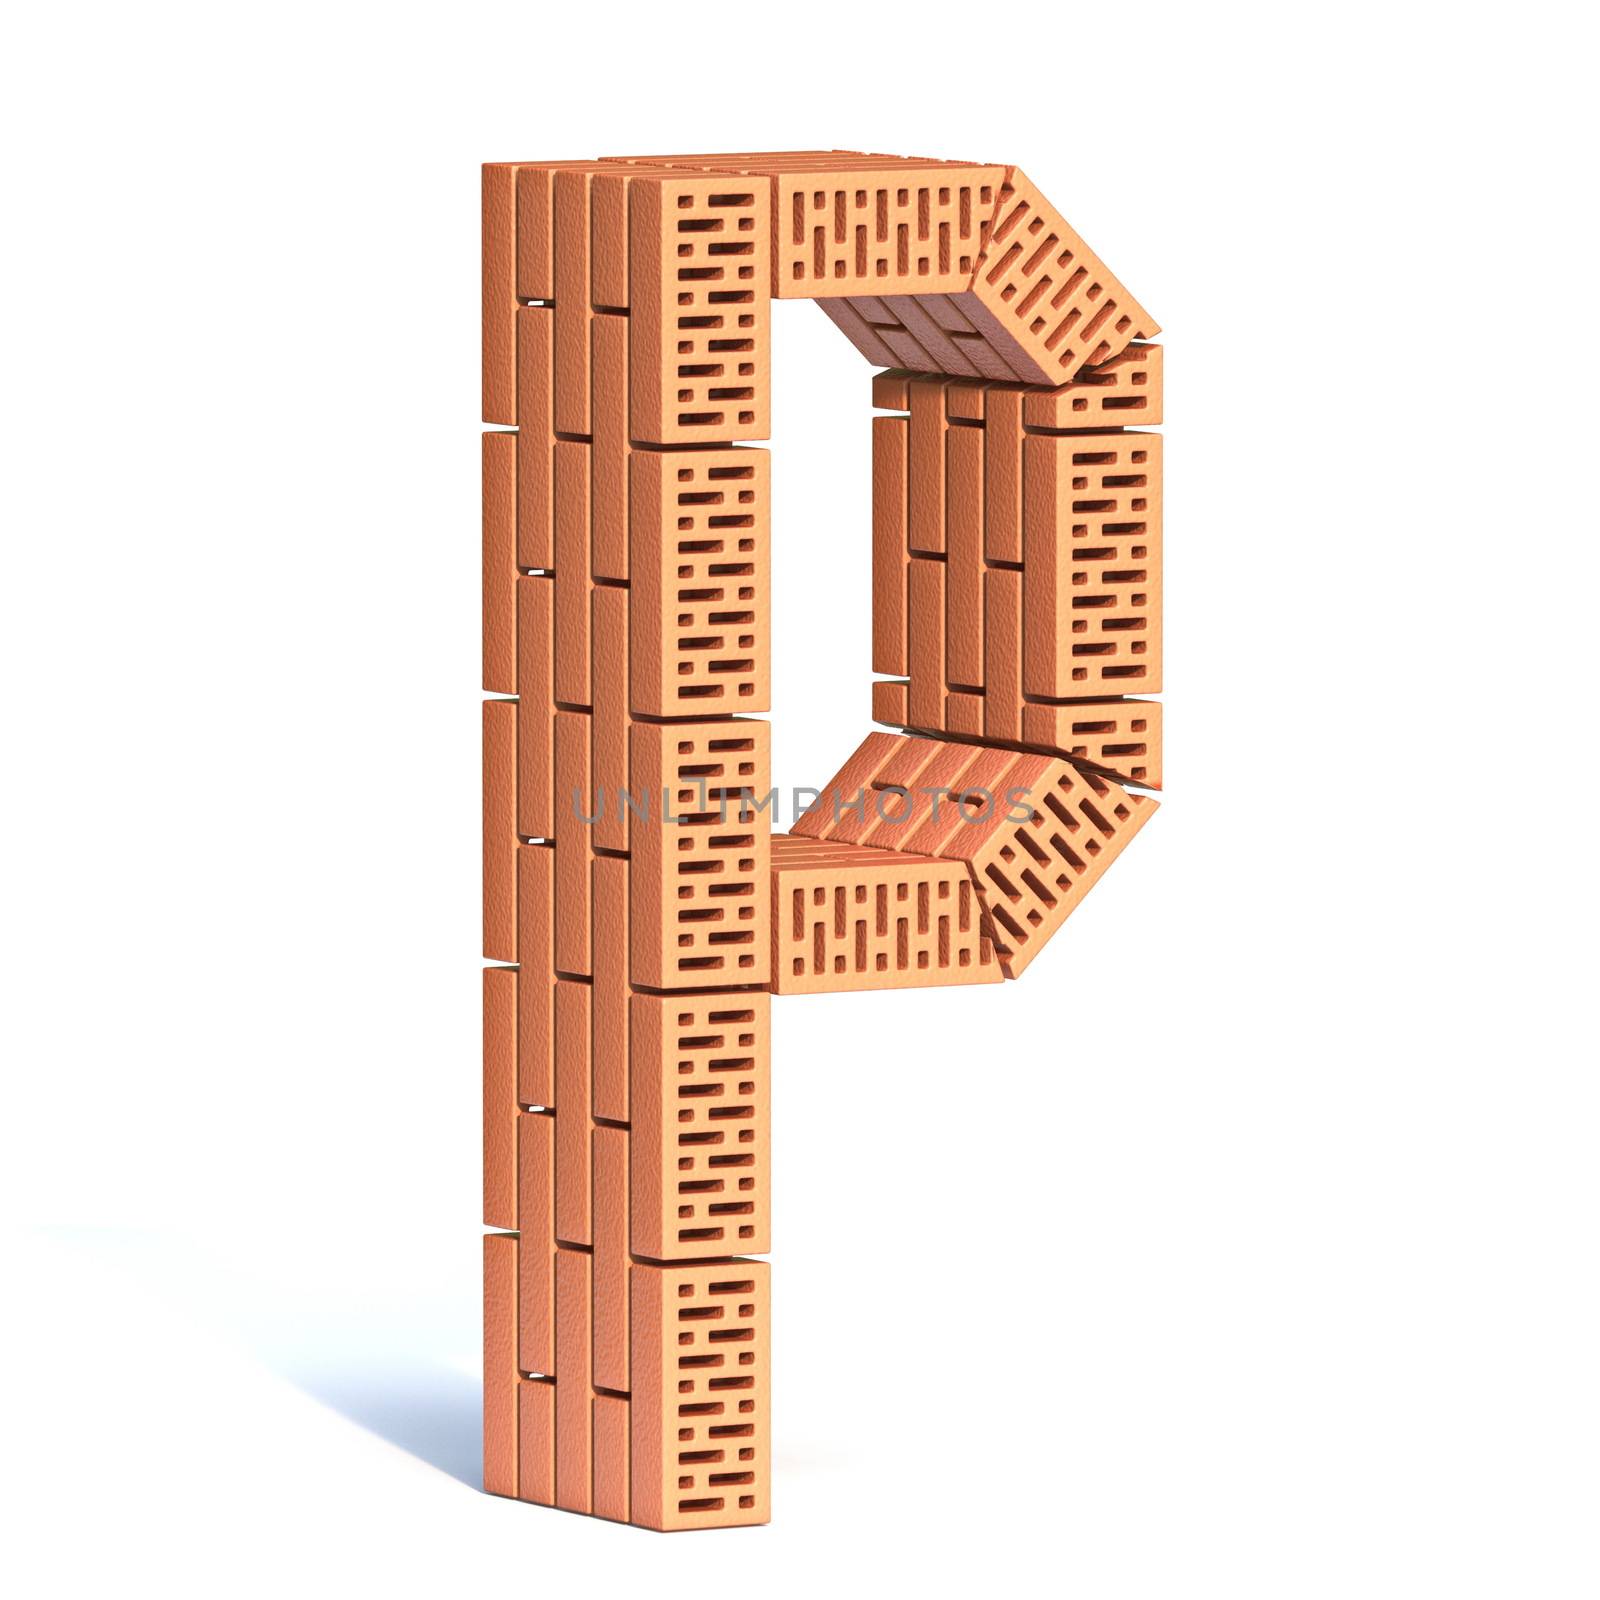 Brick wall font Letter P 3D by djmilic